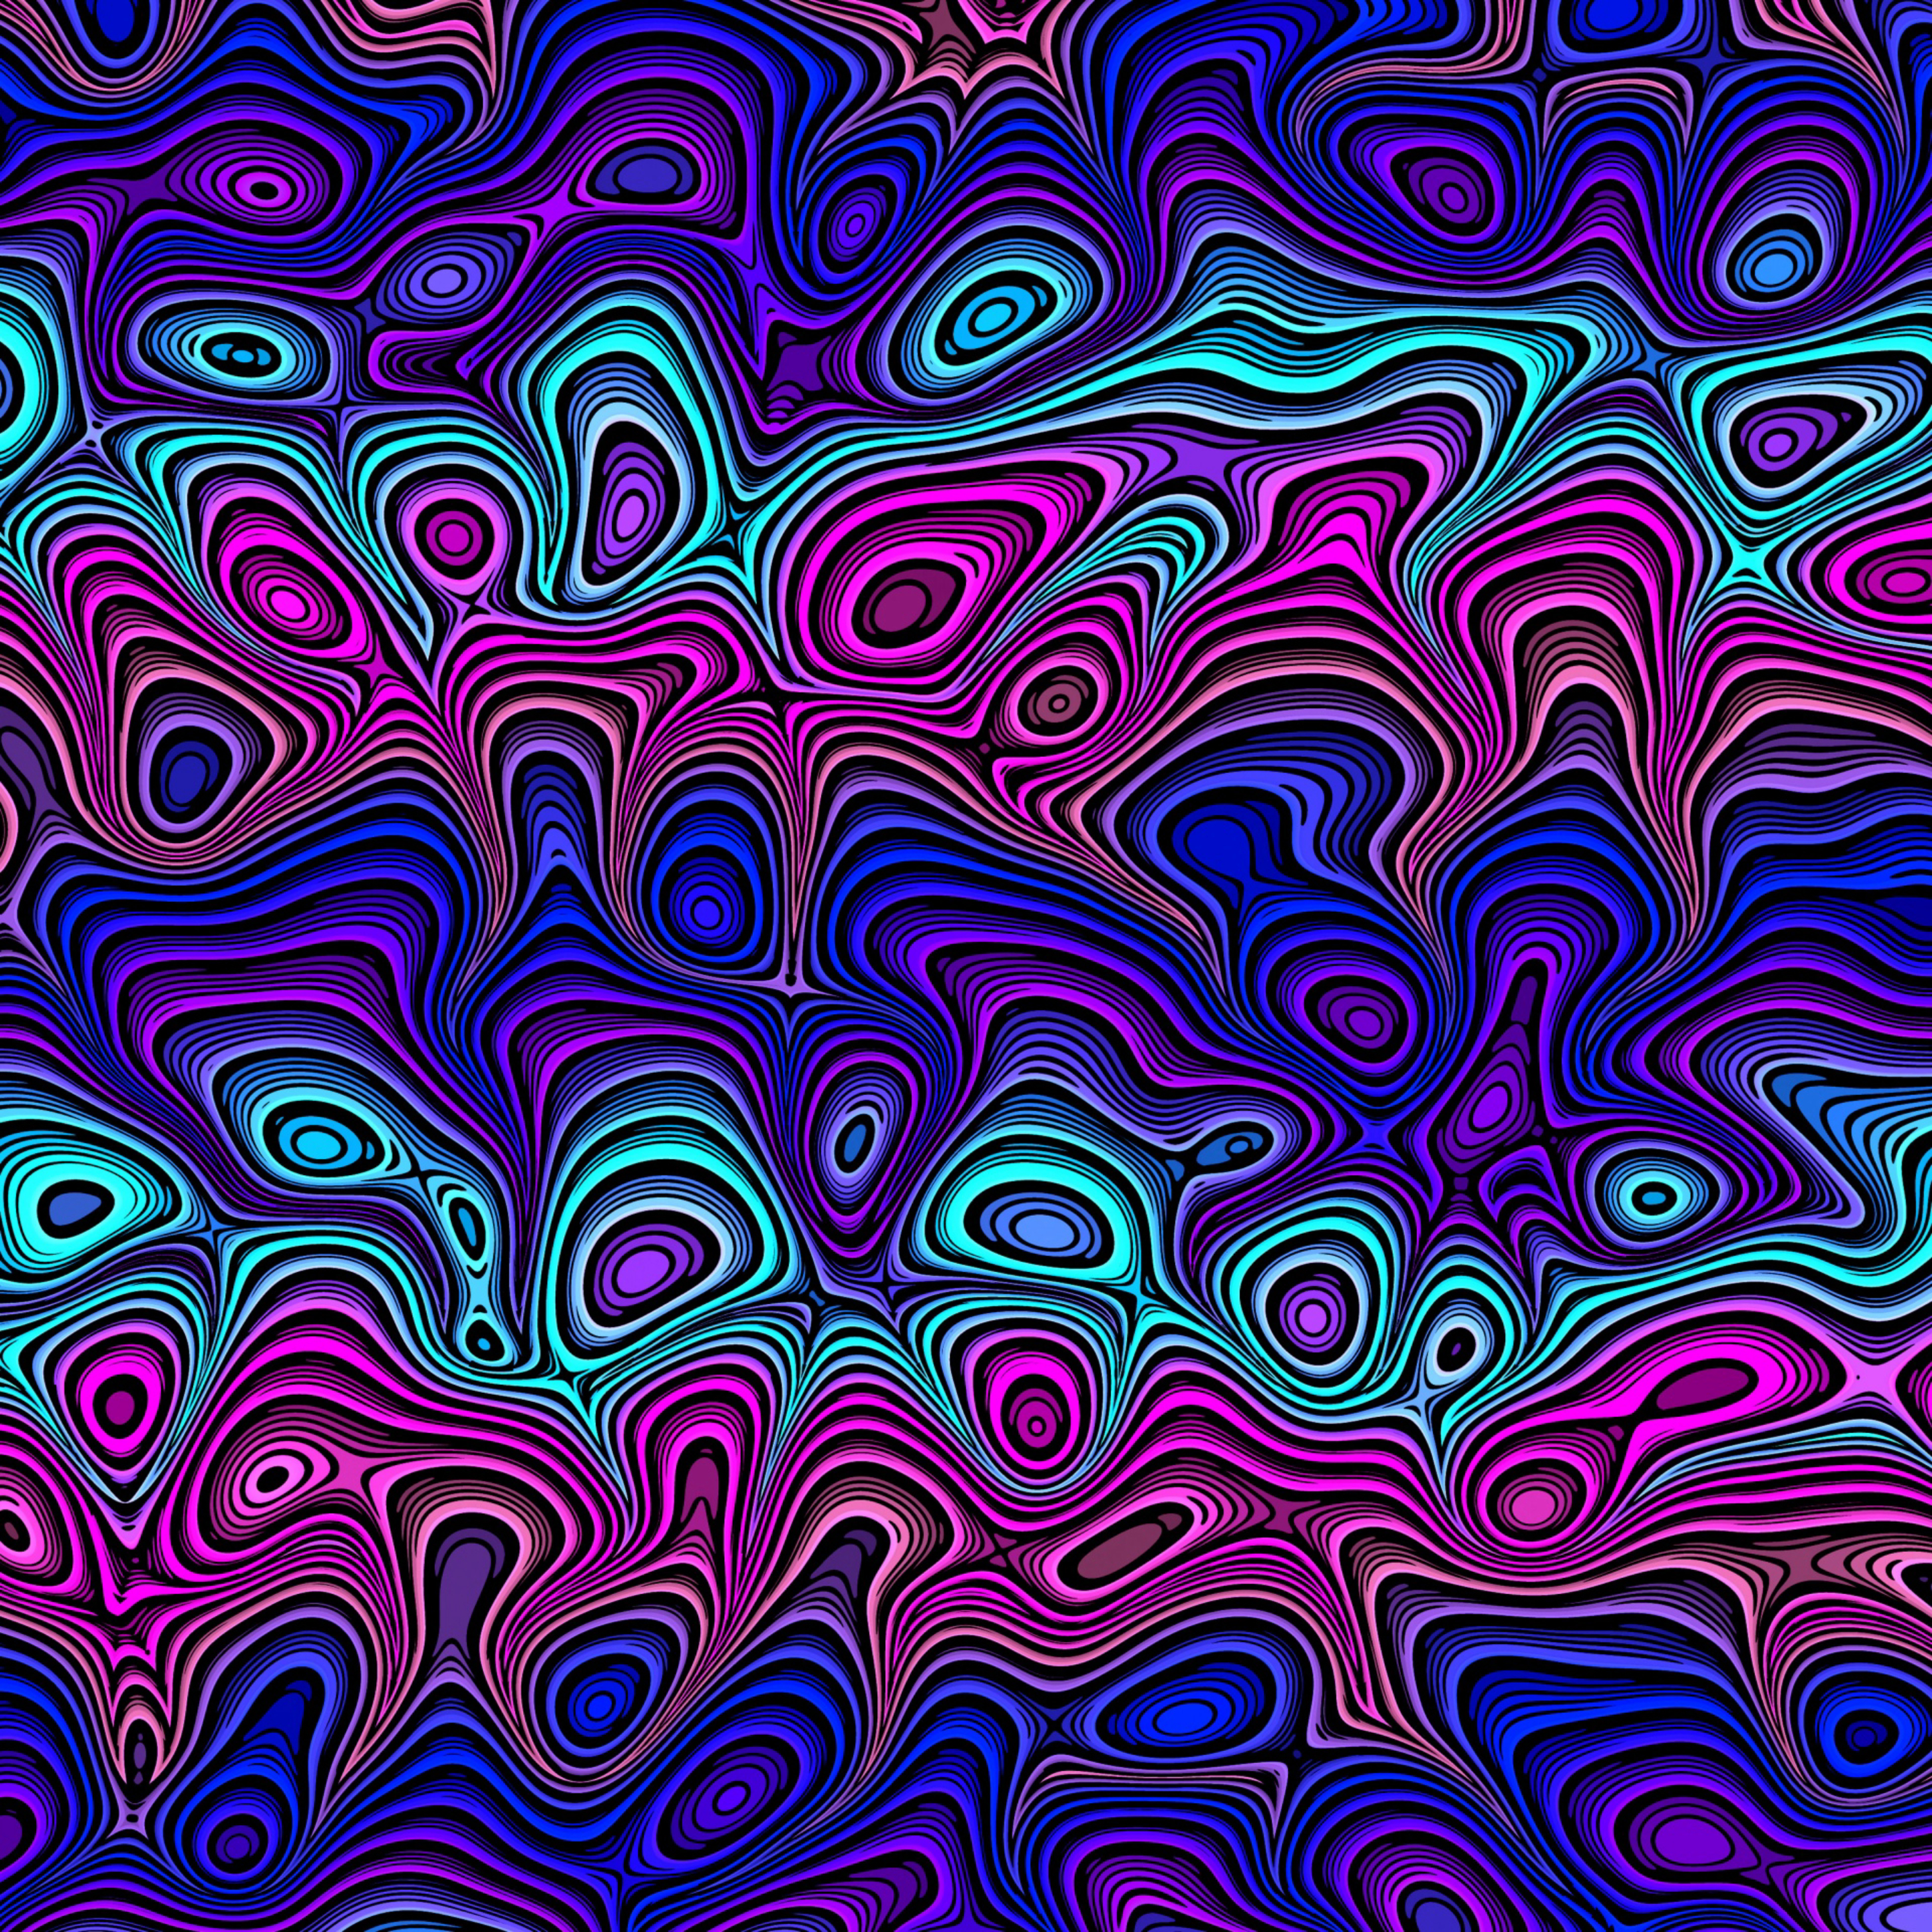 wavy, involute, lines, motley, multicolored, abstract, swirling Full HD